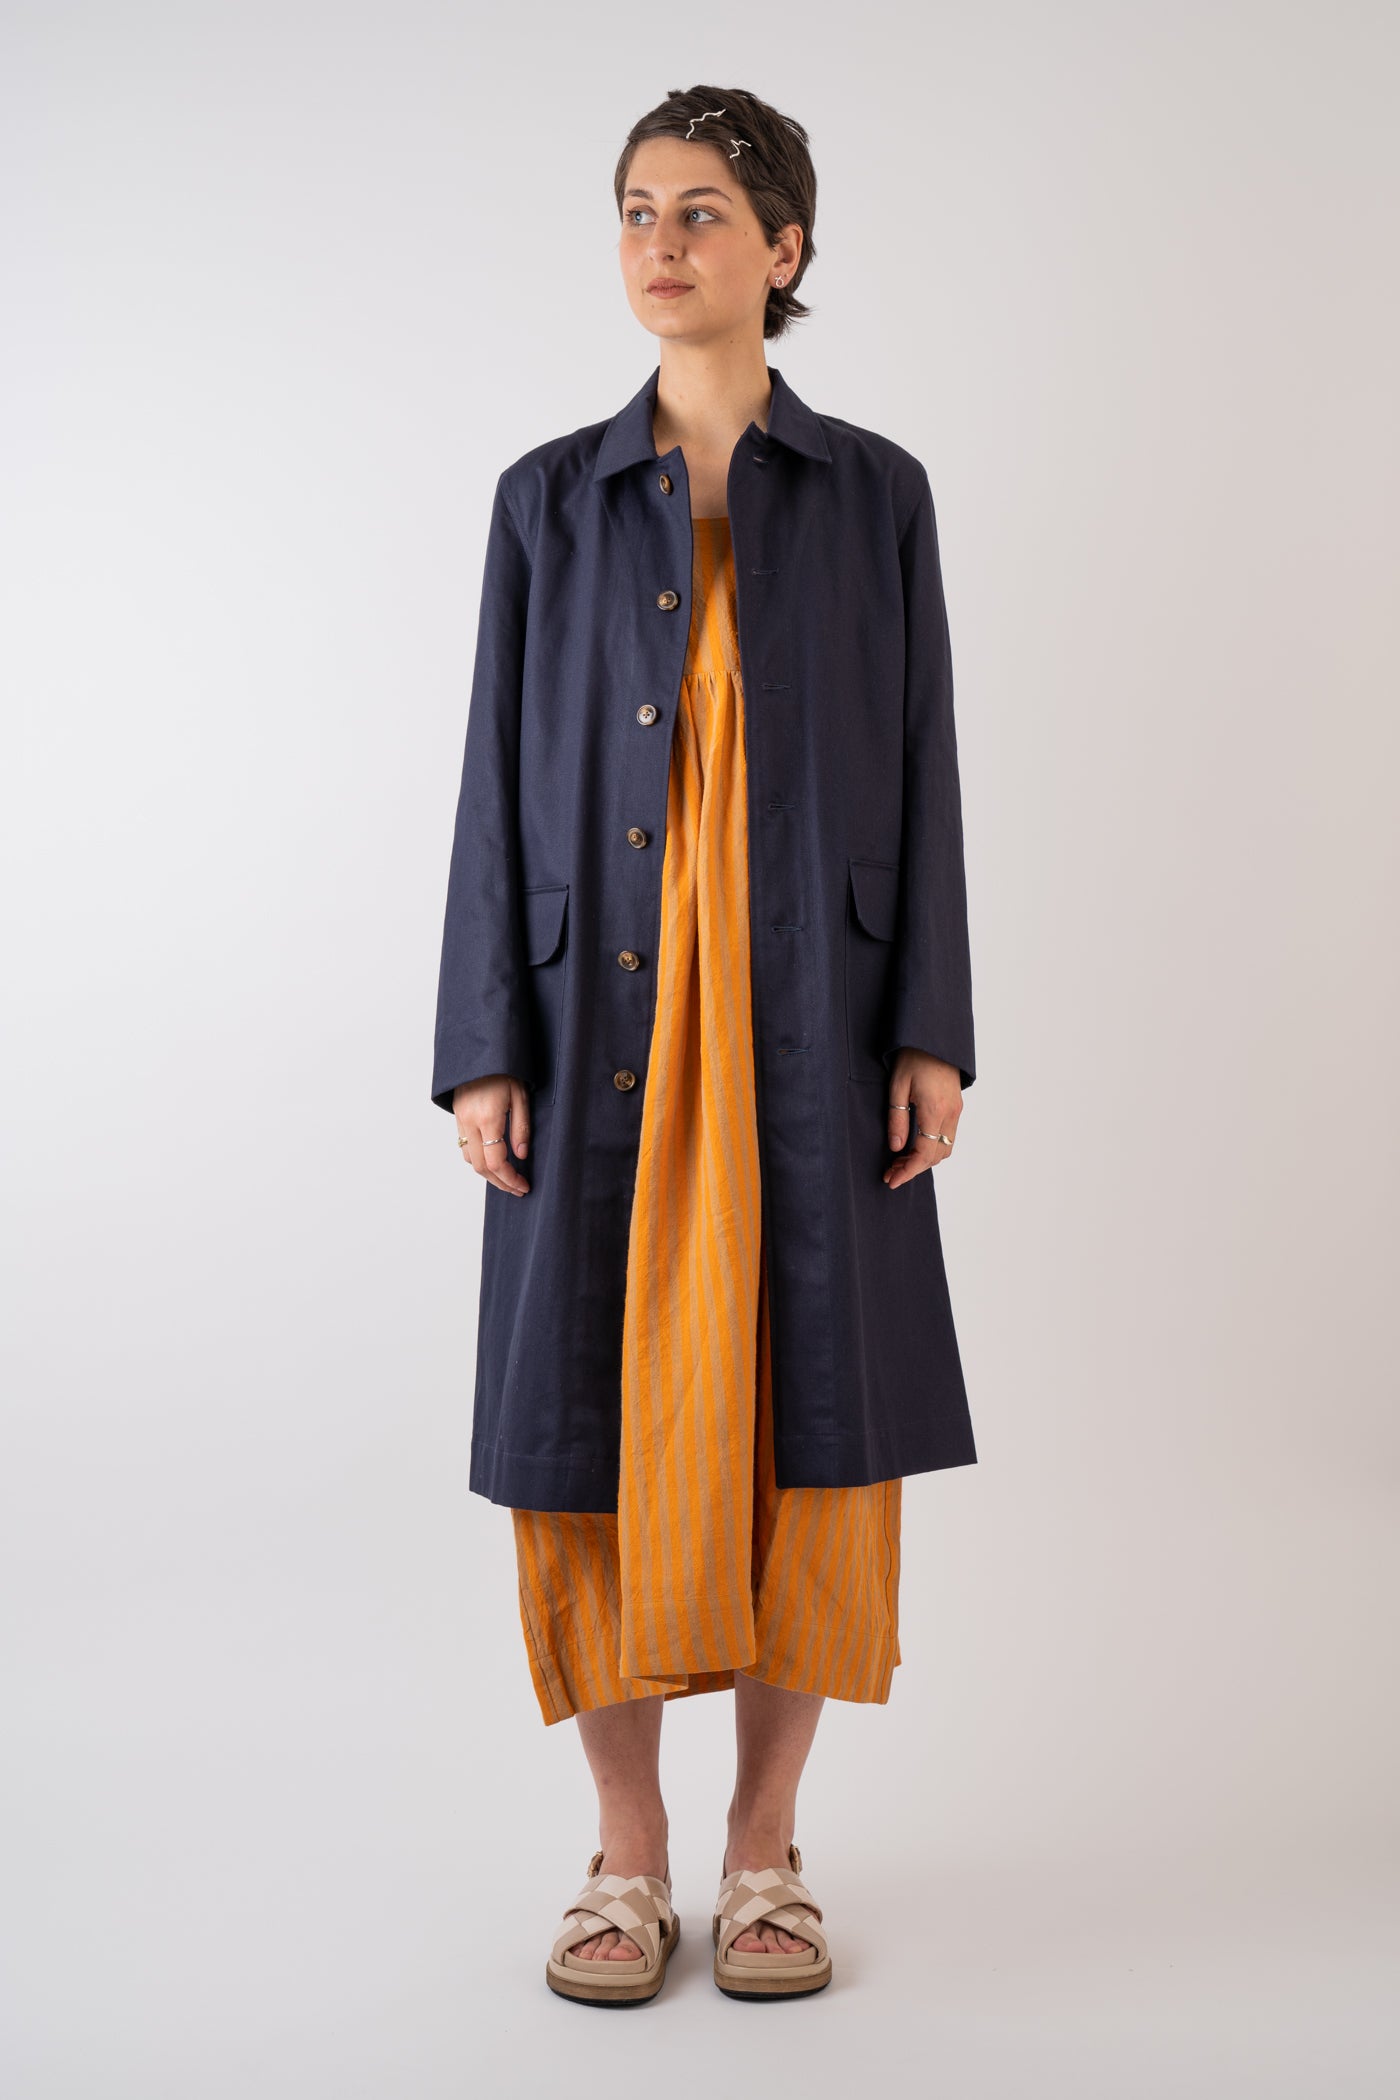 Xi Atelier Organic Cotton Drill Yves Coat in Navy handmade in Glasglow styled with Cawley Studio Elba Linen Stripe Dress